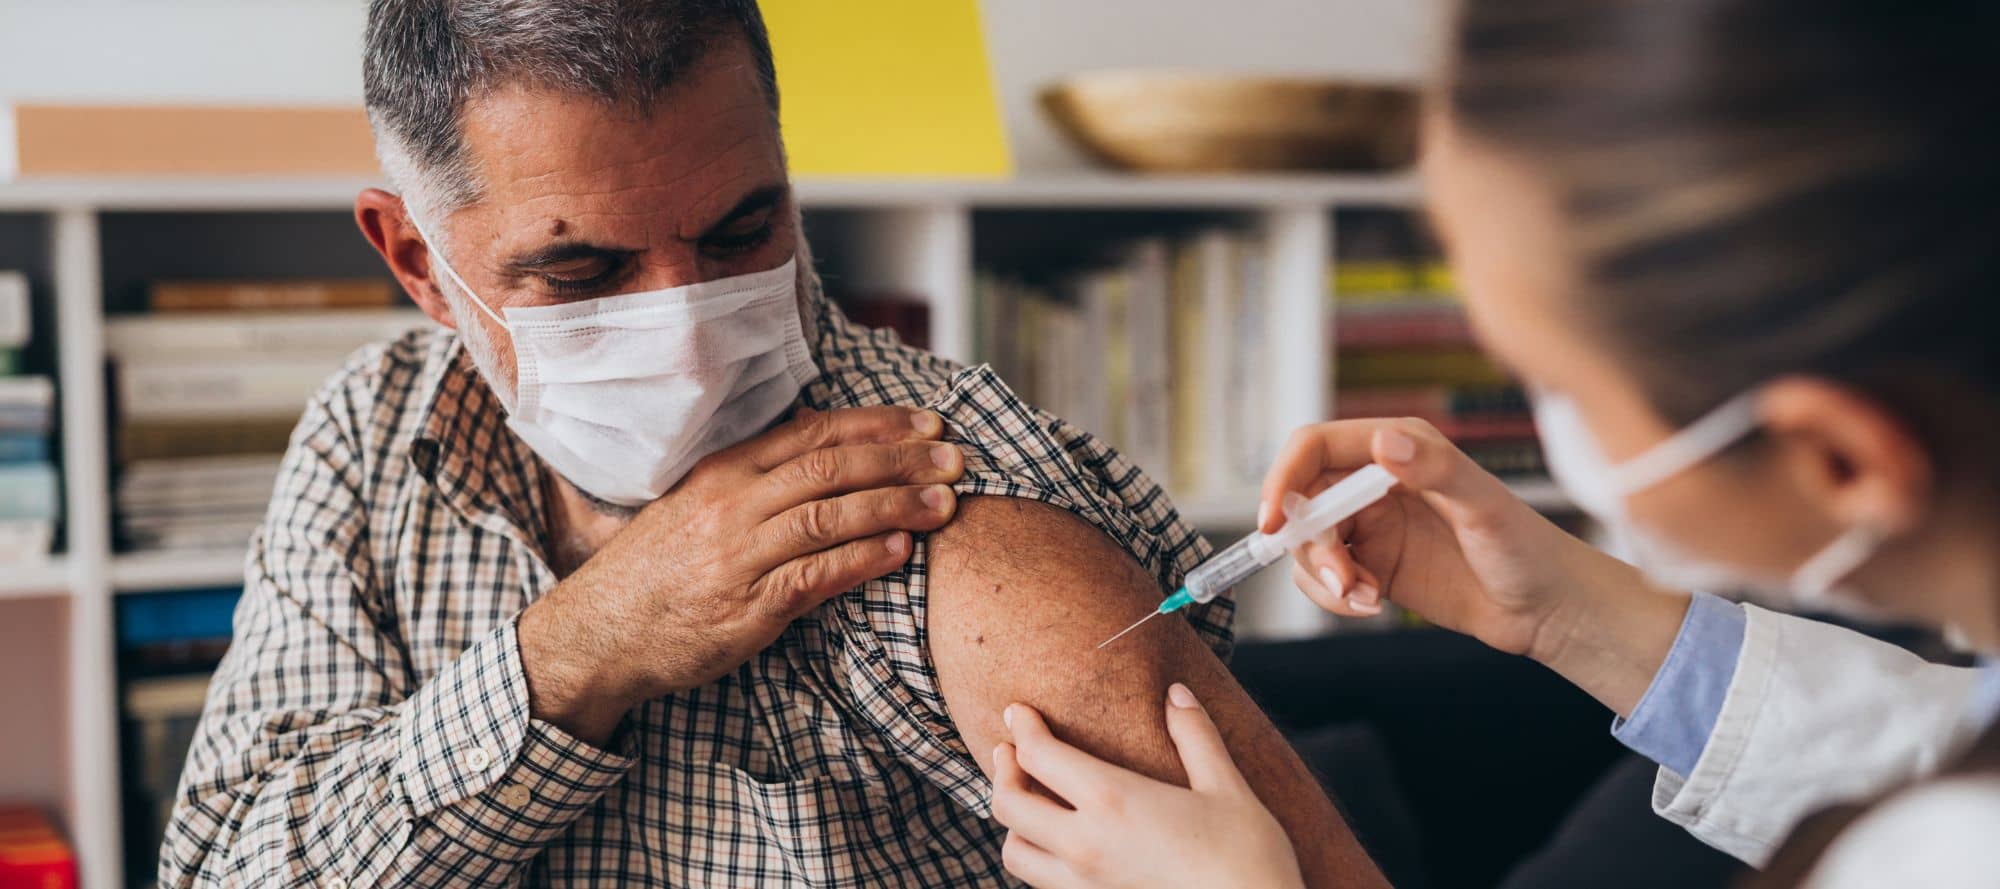 Mature man holding his shirt sleeve up while wearing mask as doctor administers vaccine in upper arm